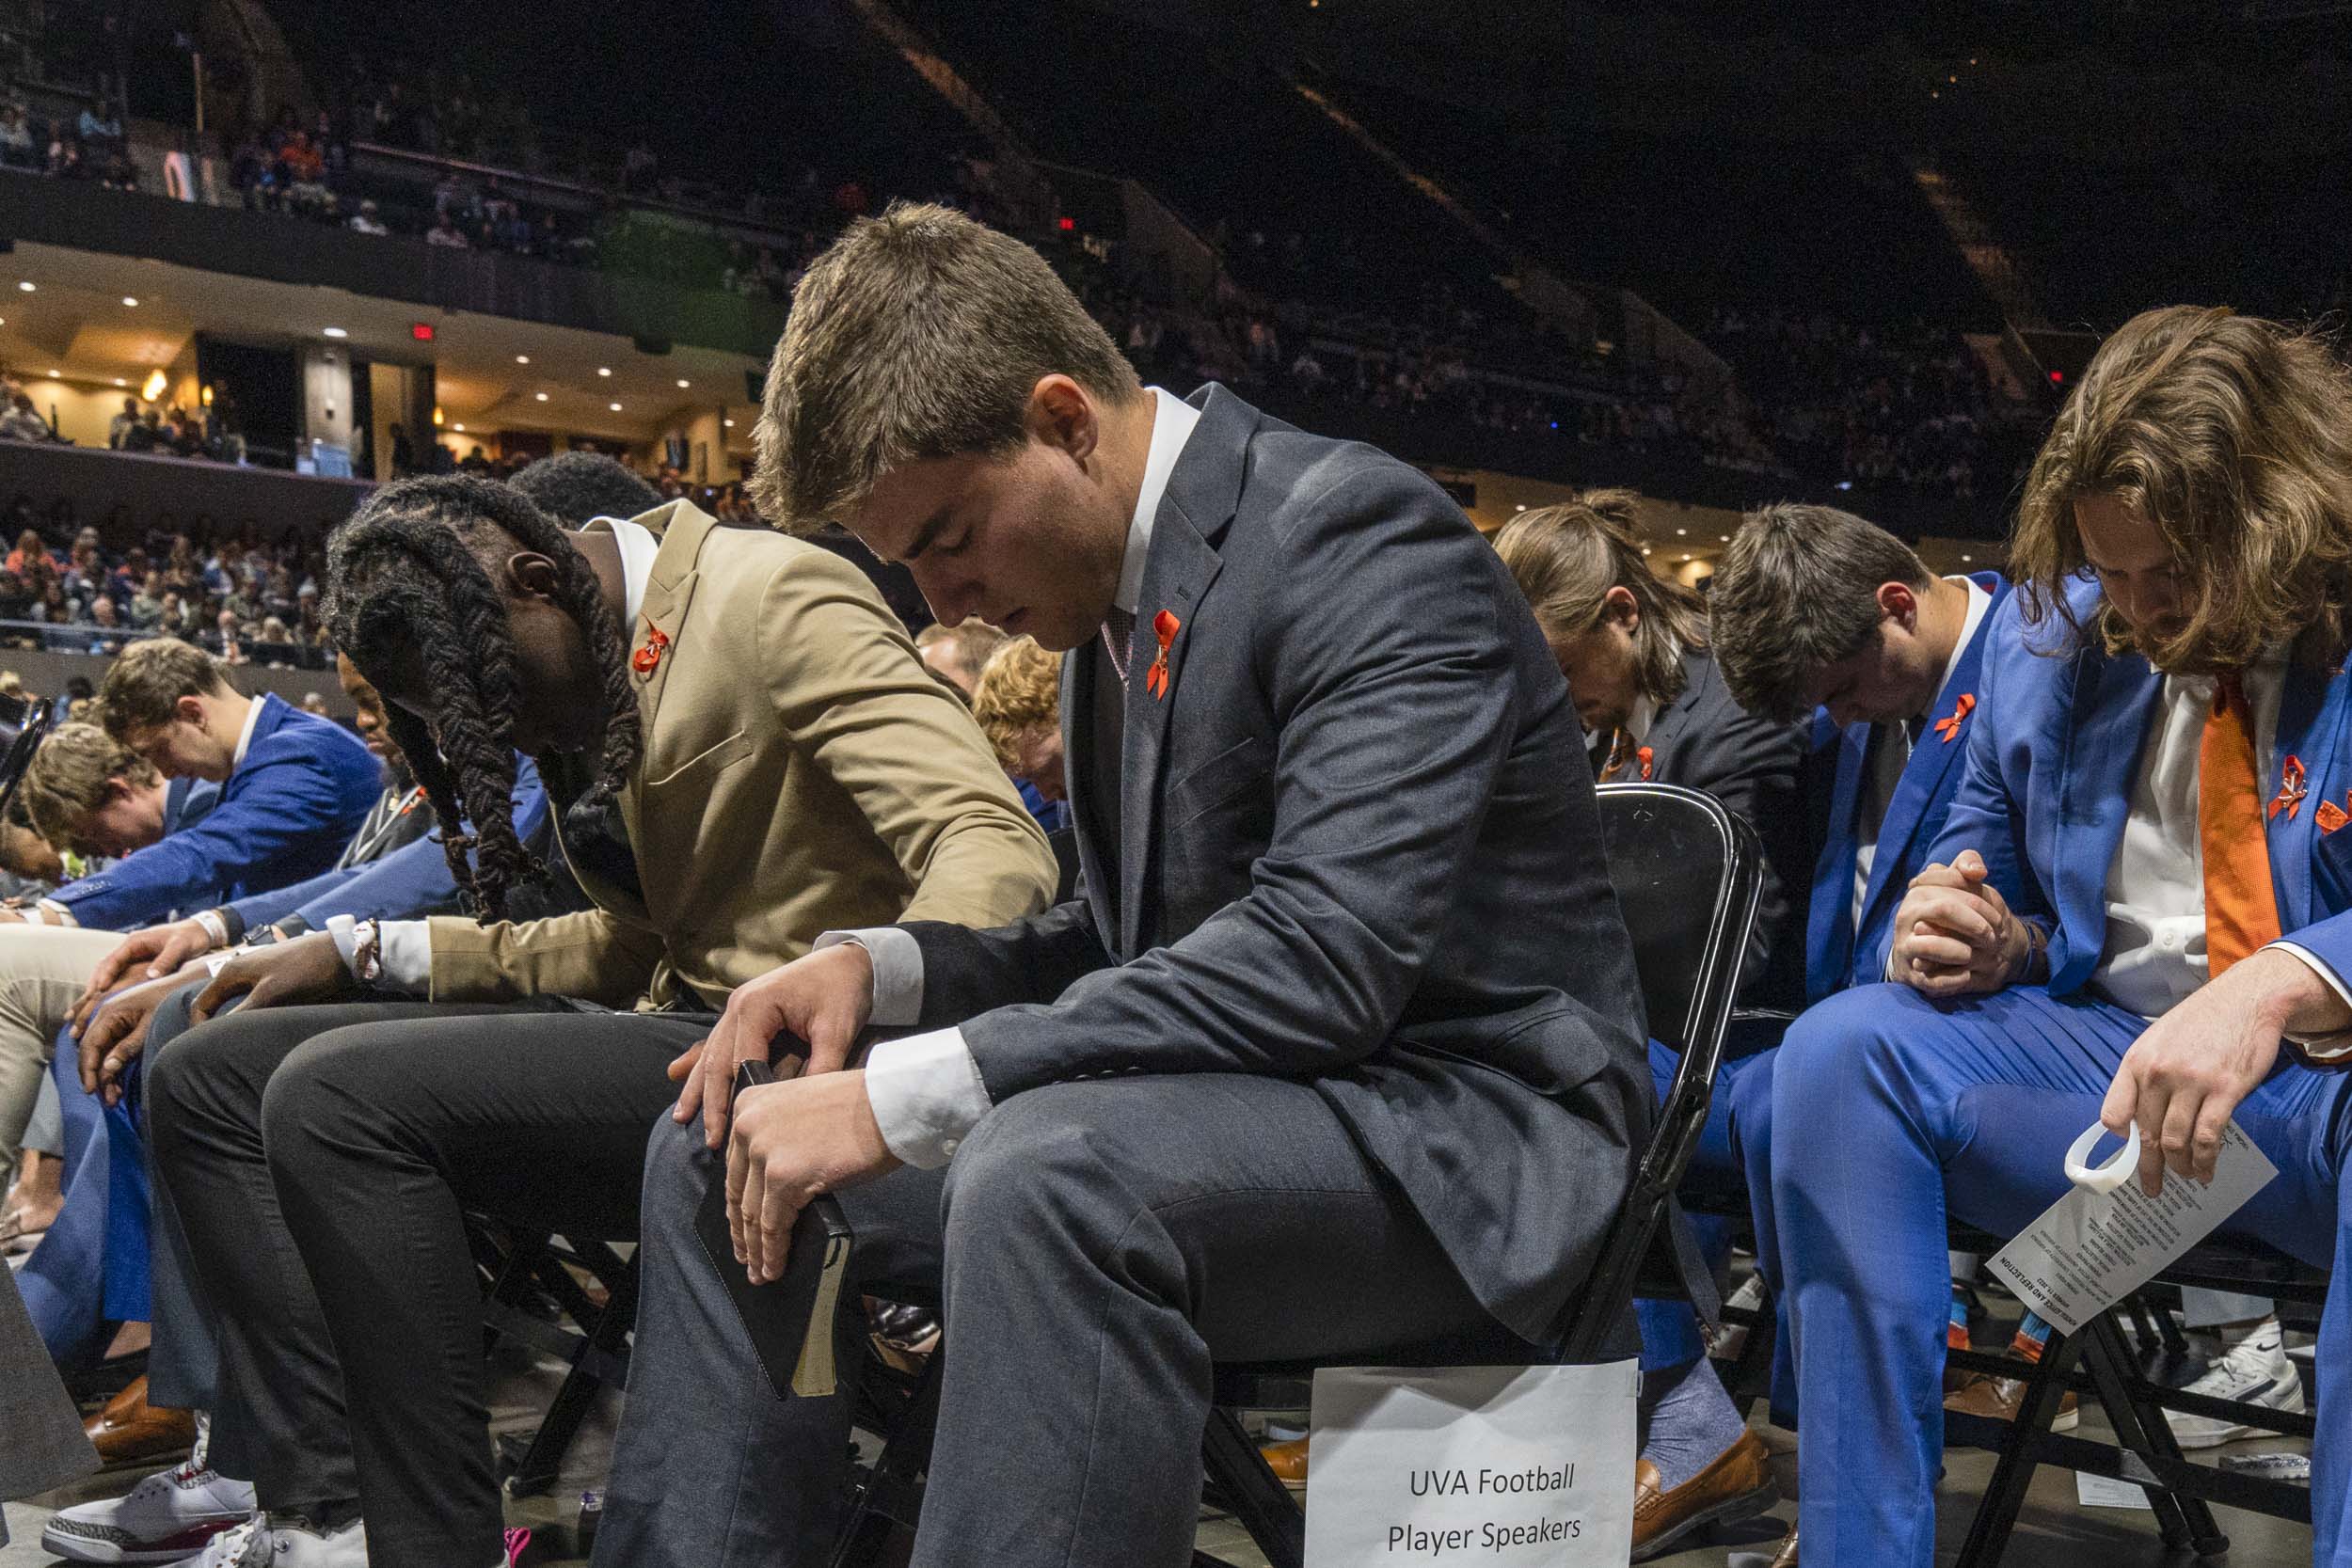 Football players mourning together